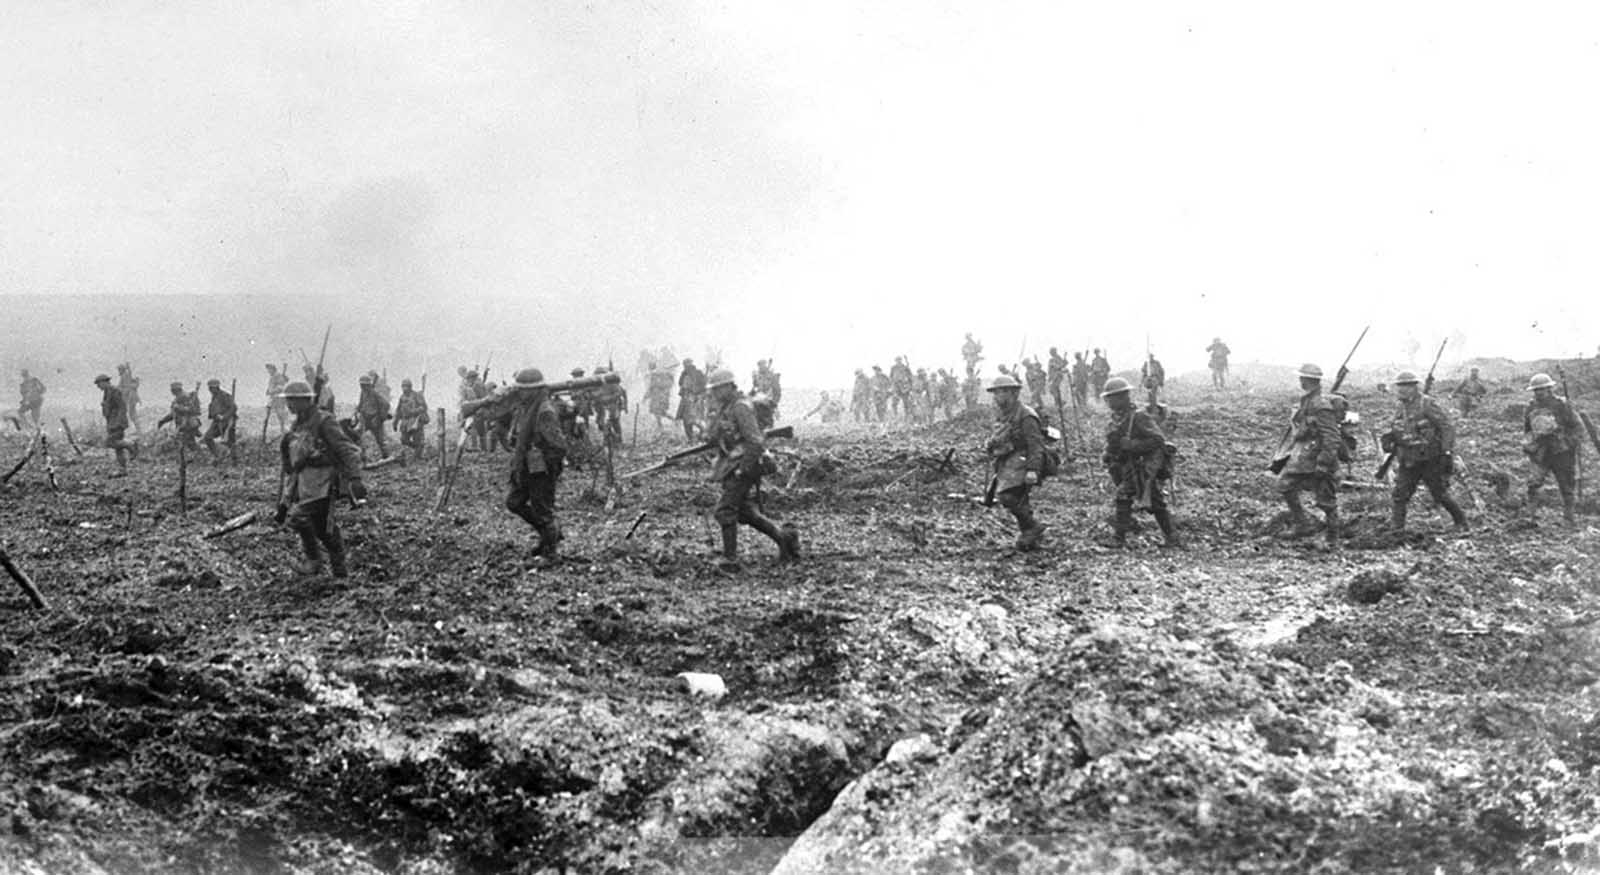 British soldiers on Vimy Ridge, 1917. British and Canadian forces pushed through German defenses at the Battle of Vimy Ridge in April of 1917, advancing as far as six miles in three days, retaking high ground and the town of Thelus, at the cost of nearly 4,000 dead.